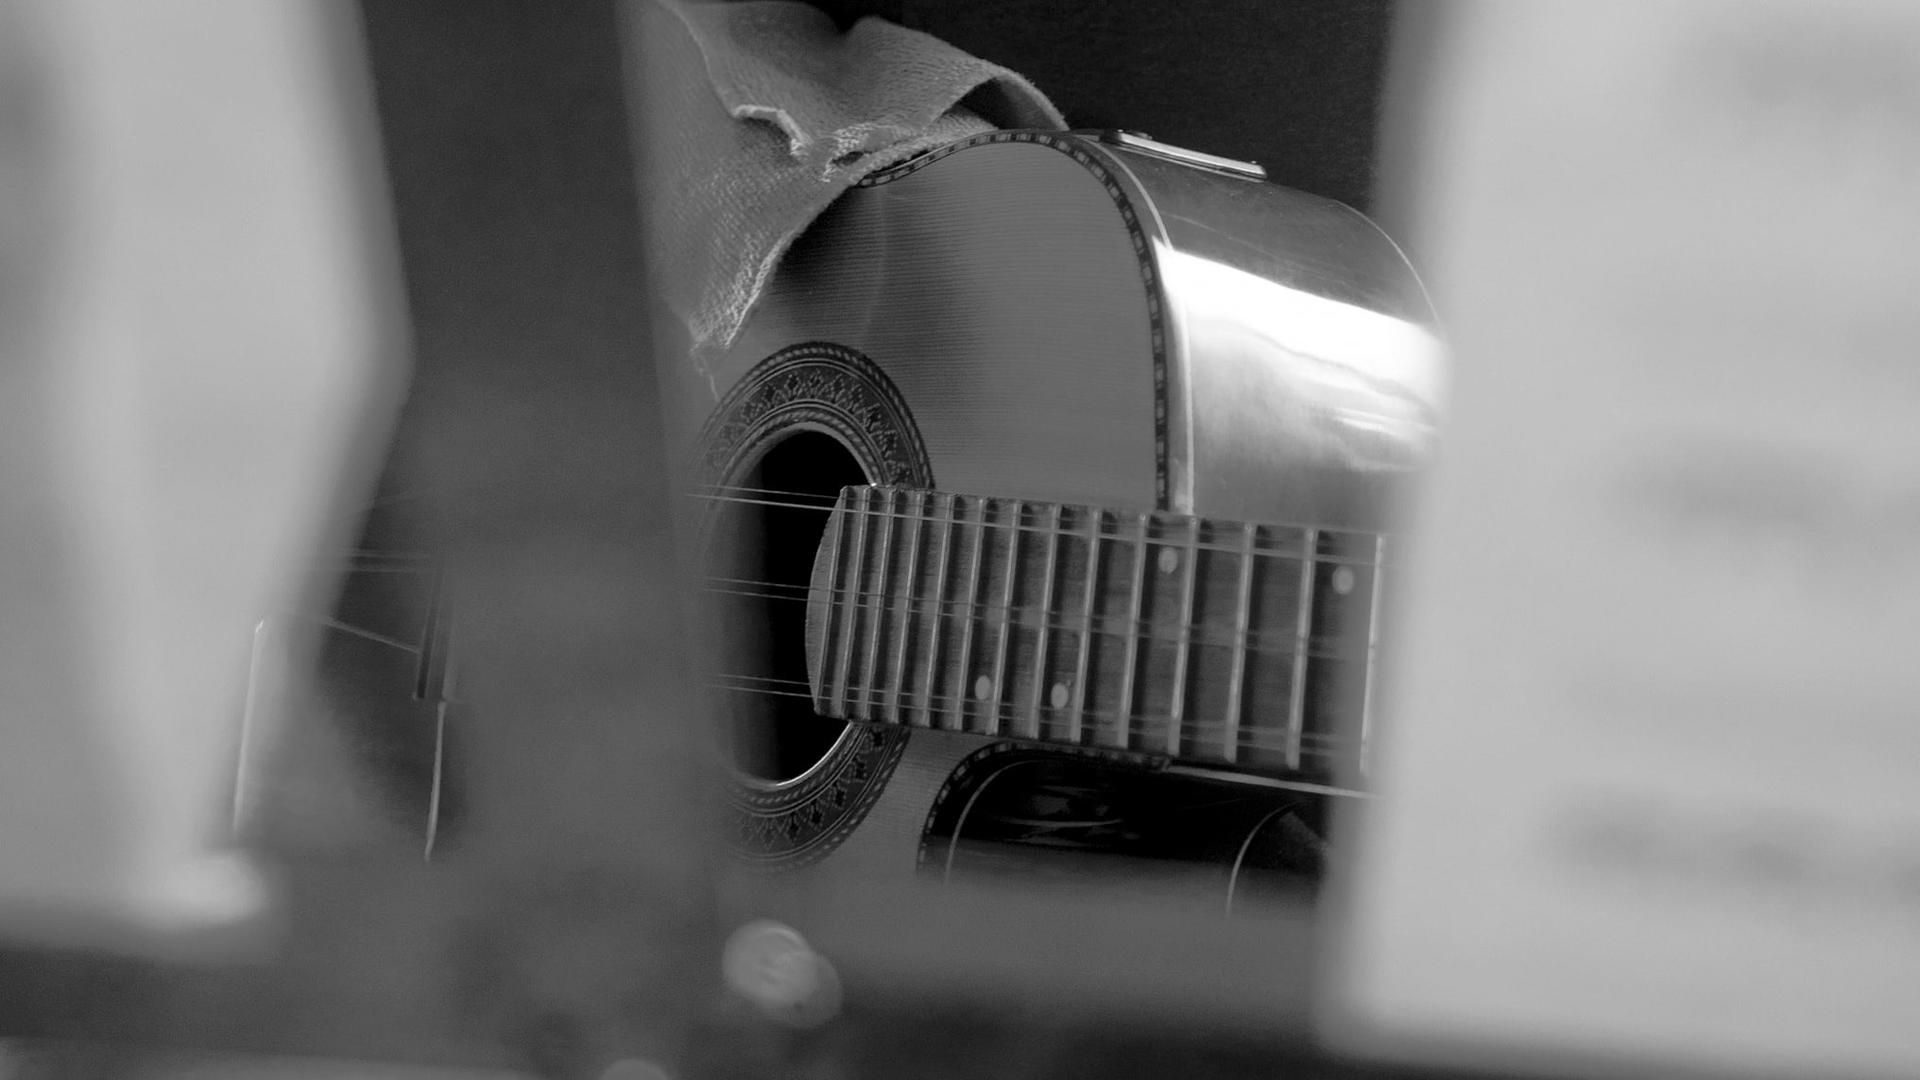 Black and white photo of a Cuban tres instrument